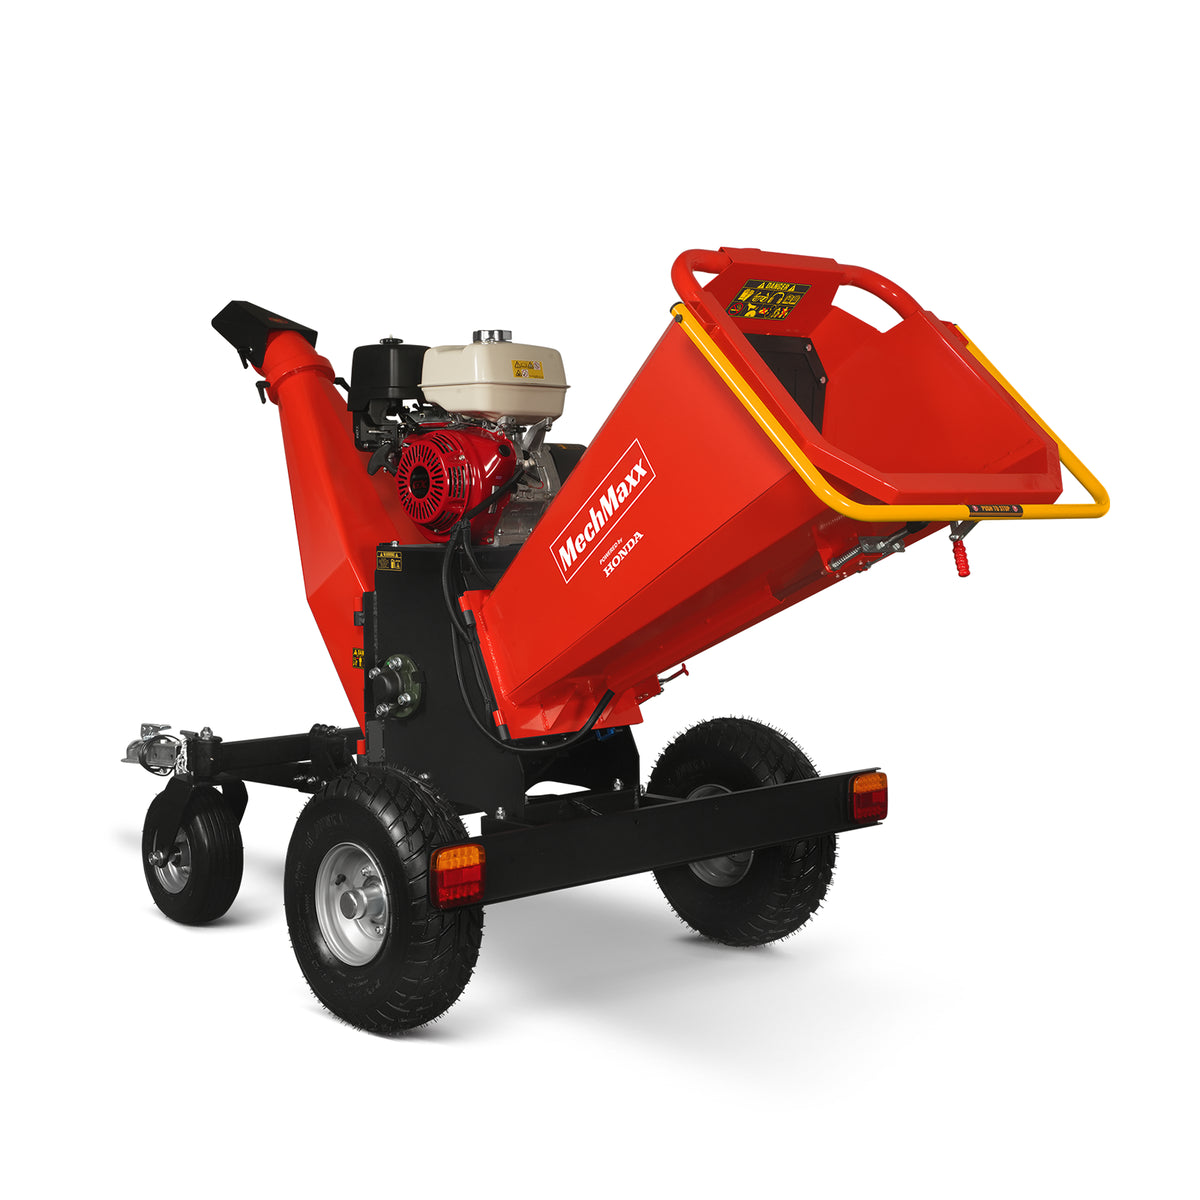 6 inch Honda Gasoline Engine Powered 4 - Wheel Drum Wood Chipper with Taillight , B150